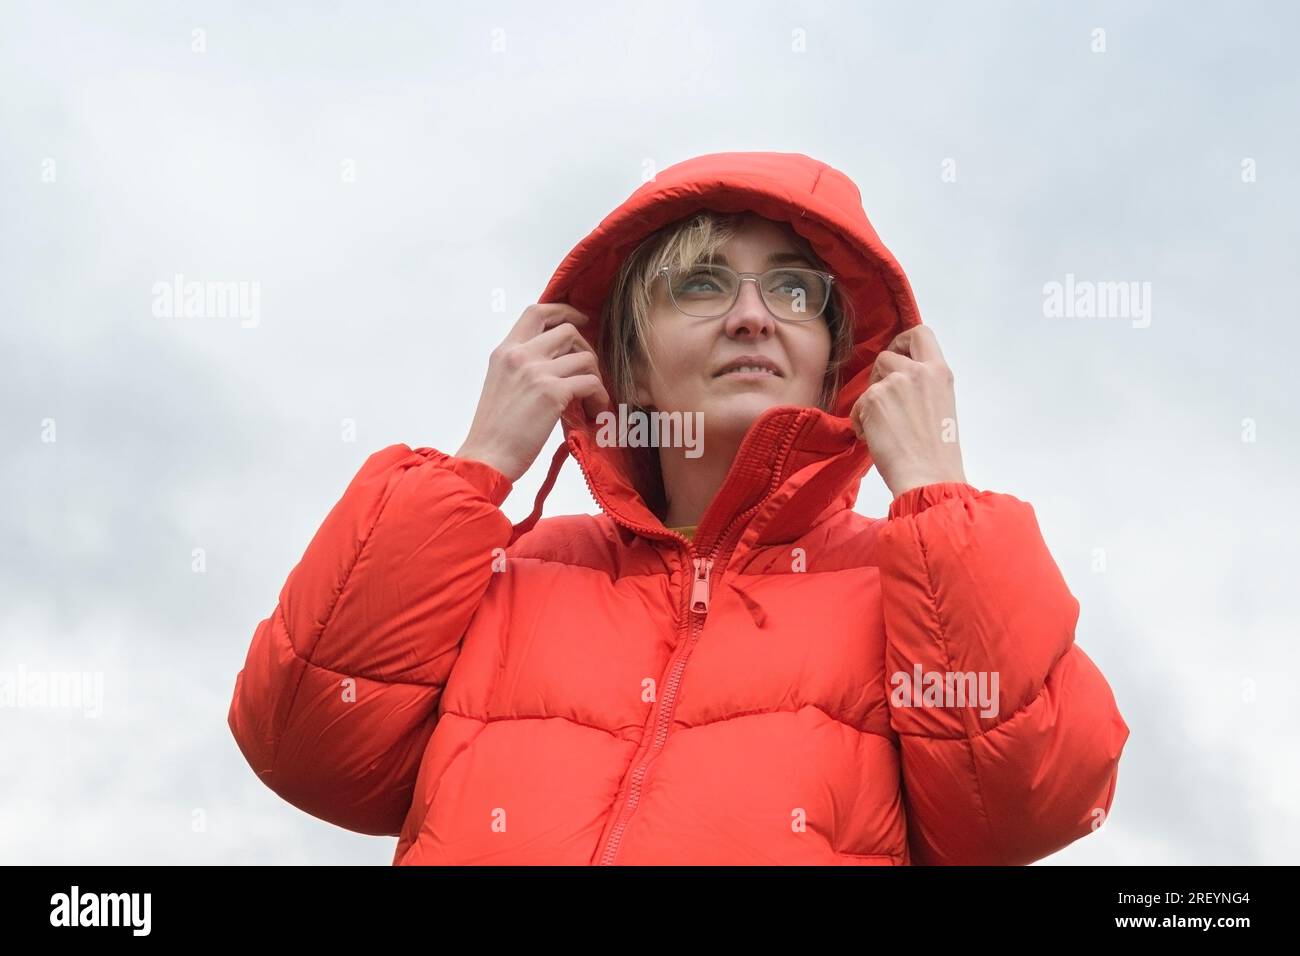 Portrait of a woman in a red jacket with a hood on her head against a cloudy sky Stock Photo